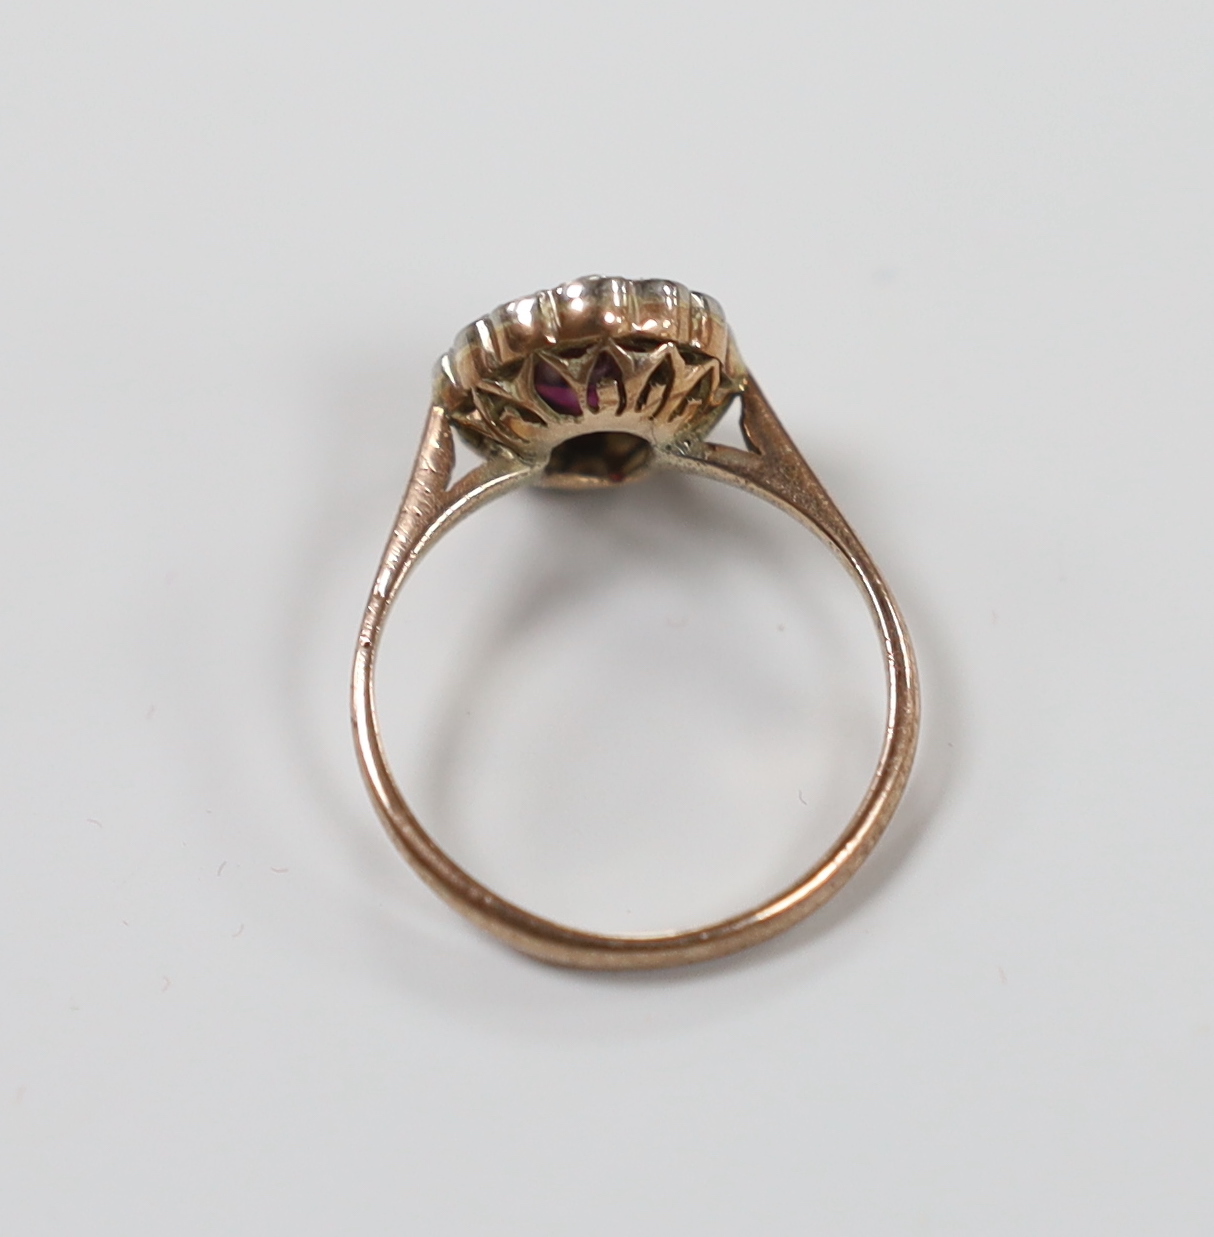 A 9k gold, diamond and garnet cluster ring, size L - Image 3 of 3